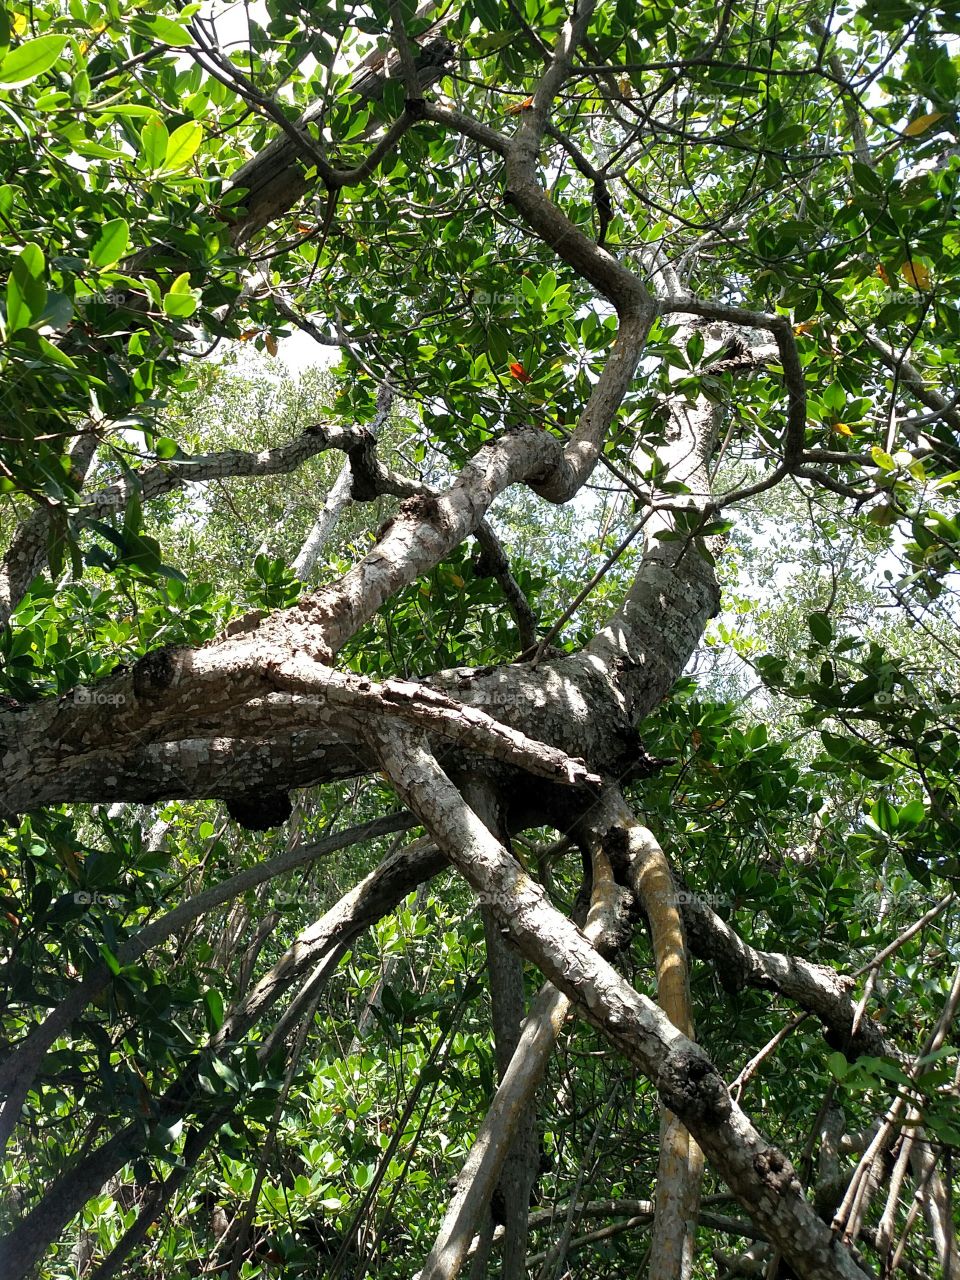 Canopy of Mangroves